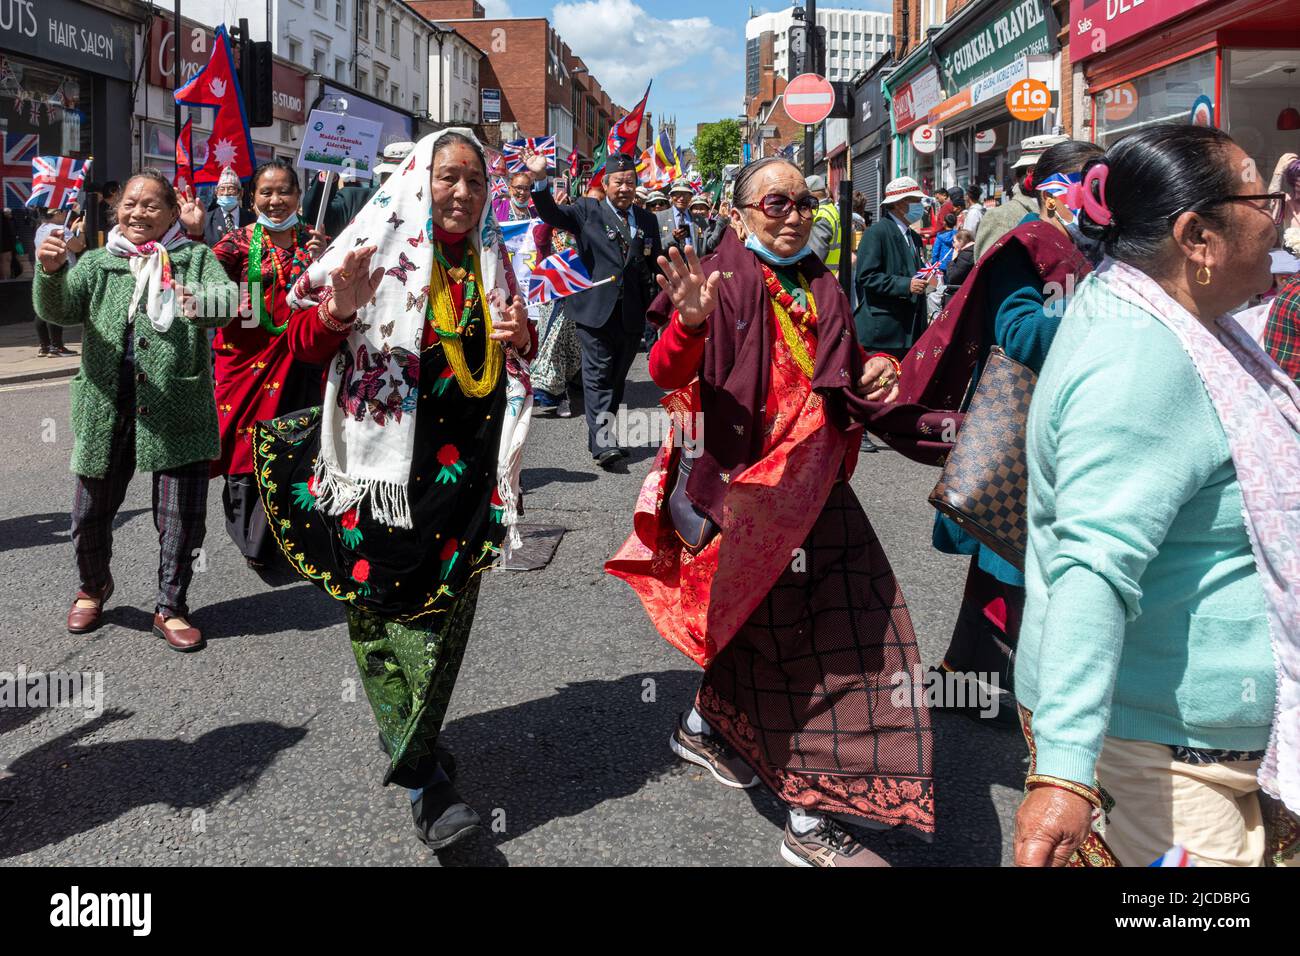 Nepali people, Nepalese Help Maddhat Shamua organisation in the Grand Parade at Victoria Day, an annual event in Aldershot, Hampshire, England, UK Stock Photo